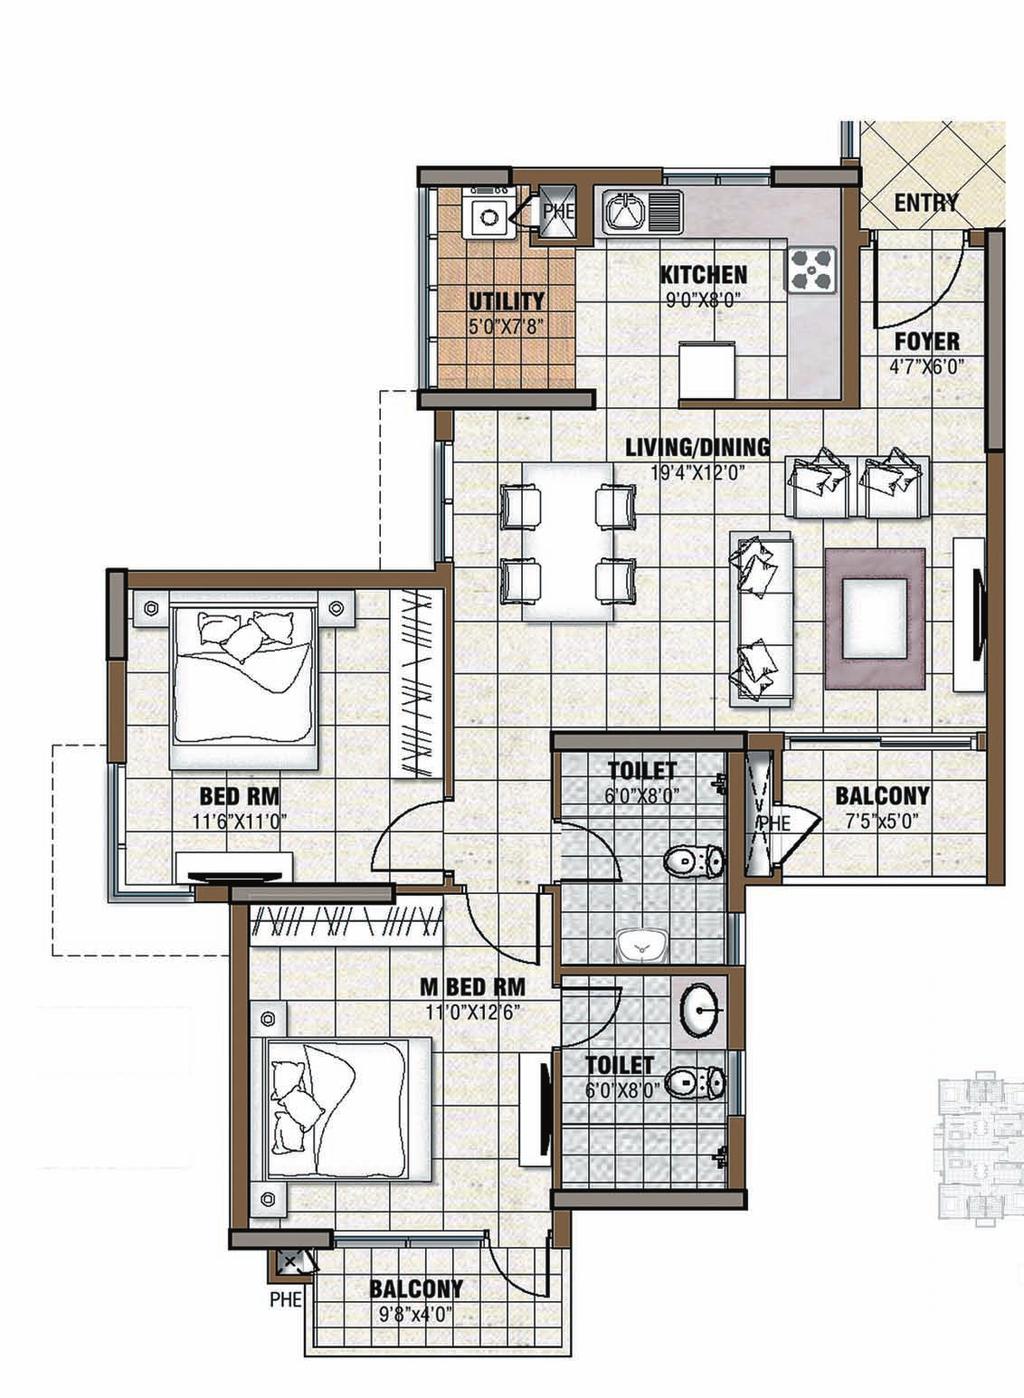 6,7,8 & 9 1sT & 2ND level TYPE D 2 BED AReA - 1139